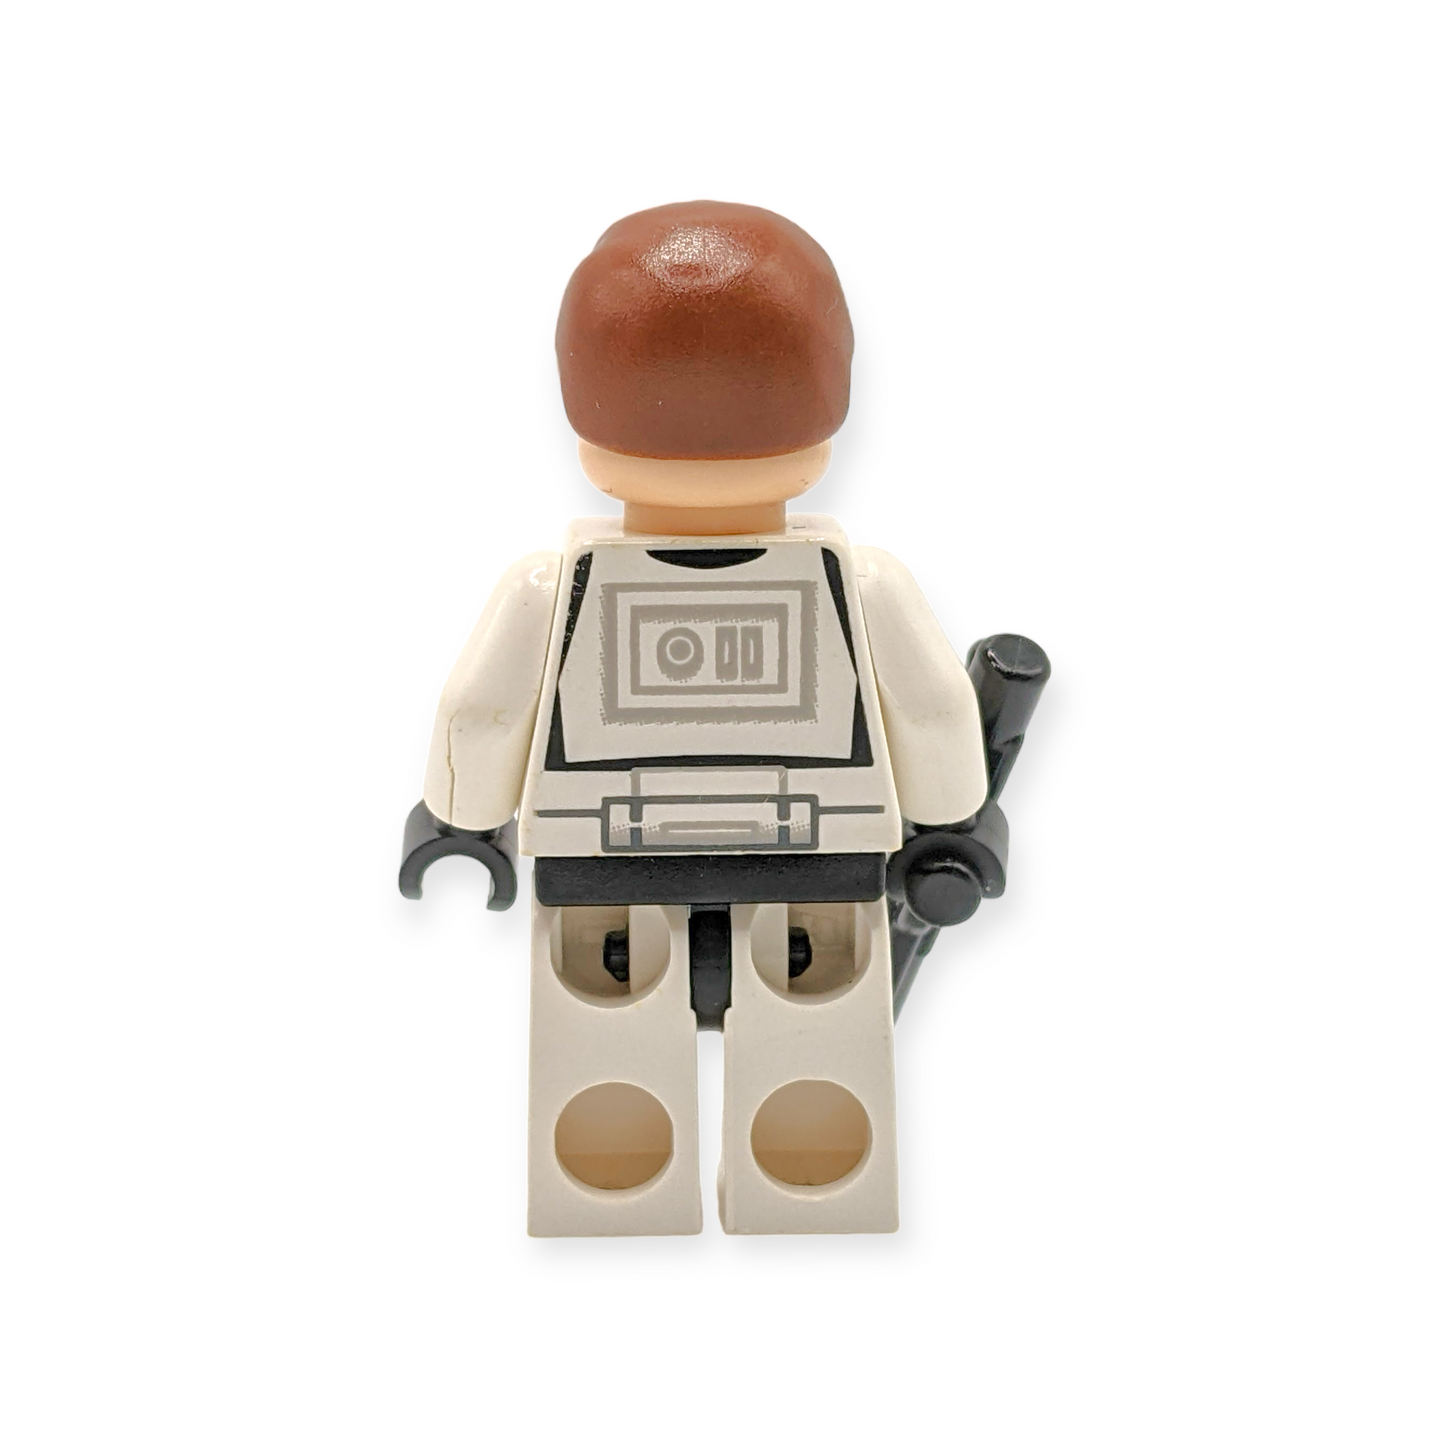 LEGO Minifigur Star Wars Han Solo Stormtrooper Outfit